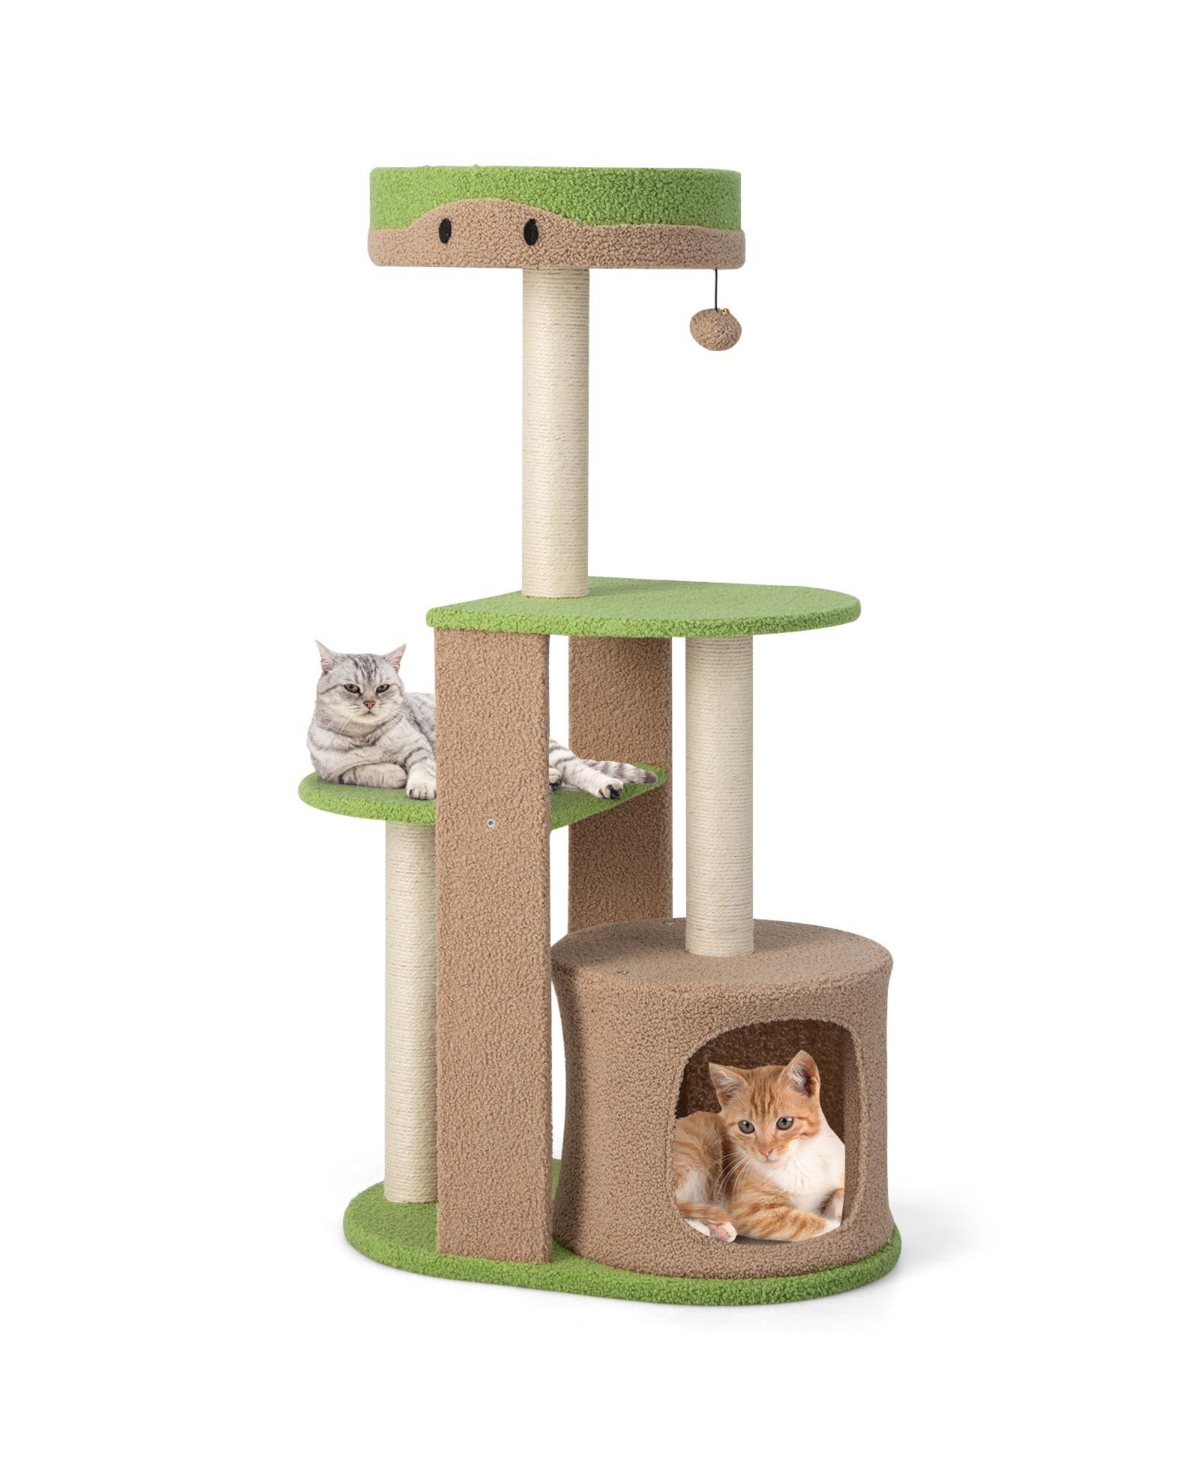 5-Tier Cat Tree Tower 44'' Cat Climbing Stand Perch with Sisal Scratching Posts - Green